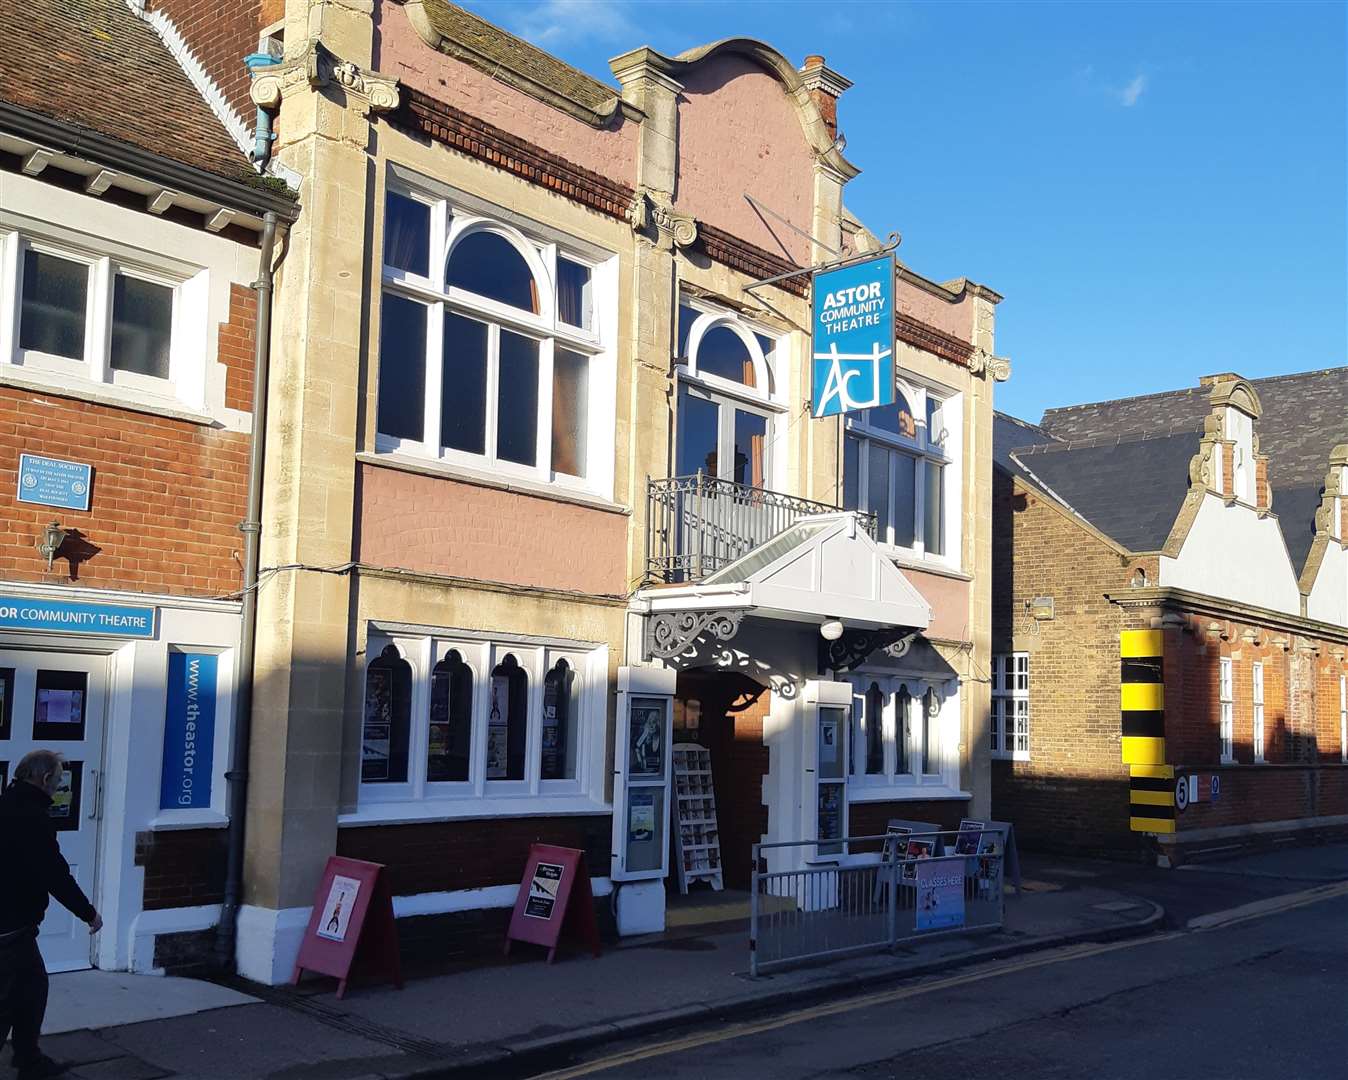 The cinema would be at the Astor Theatre in Deal